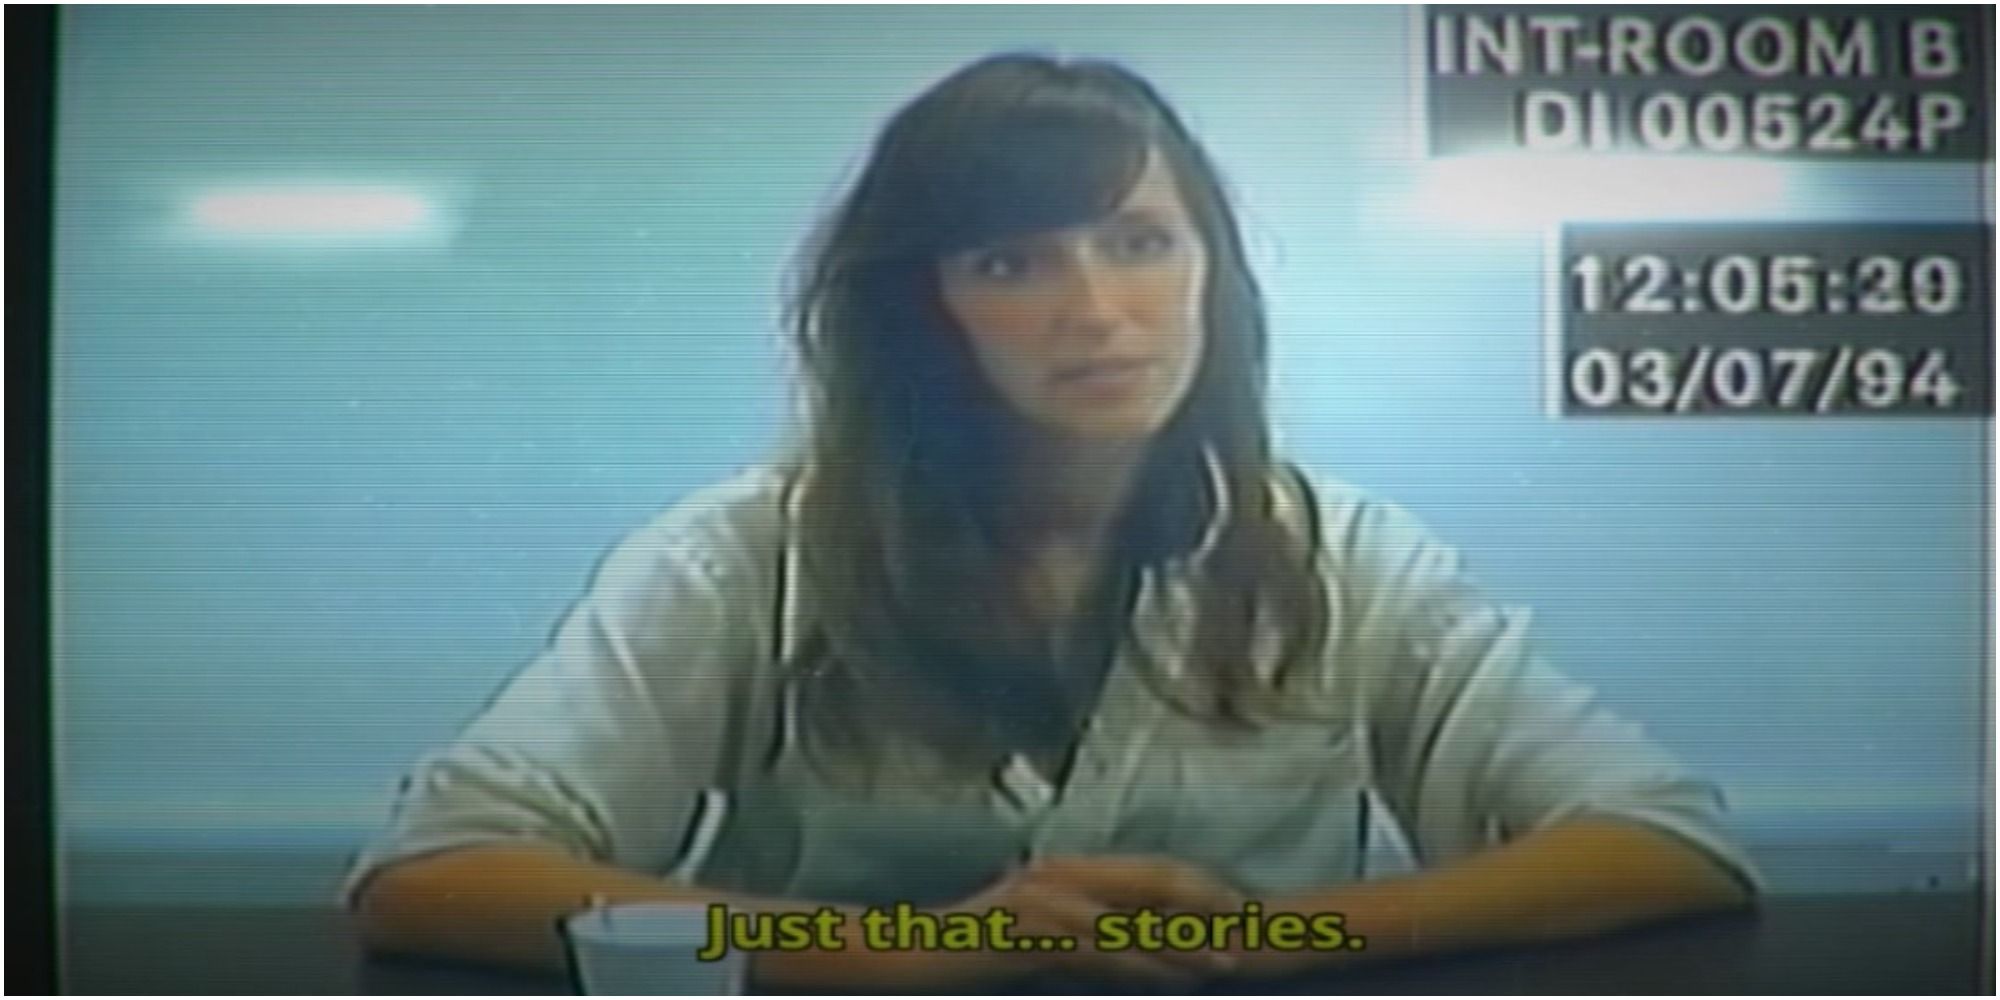 Her Story Watching An Interrogation From The Tape